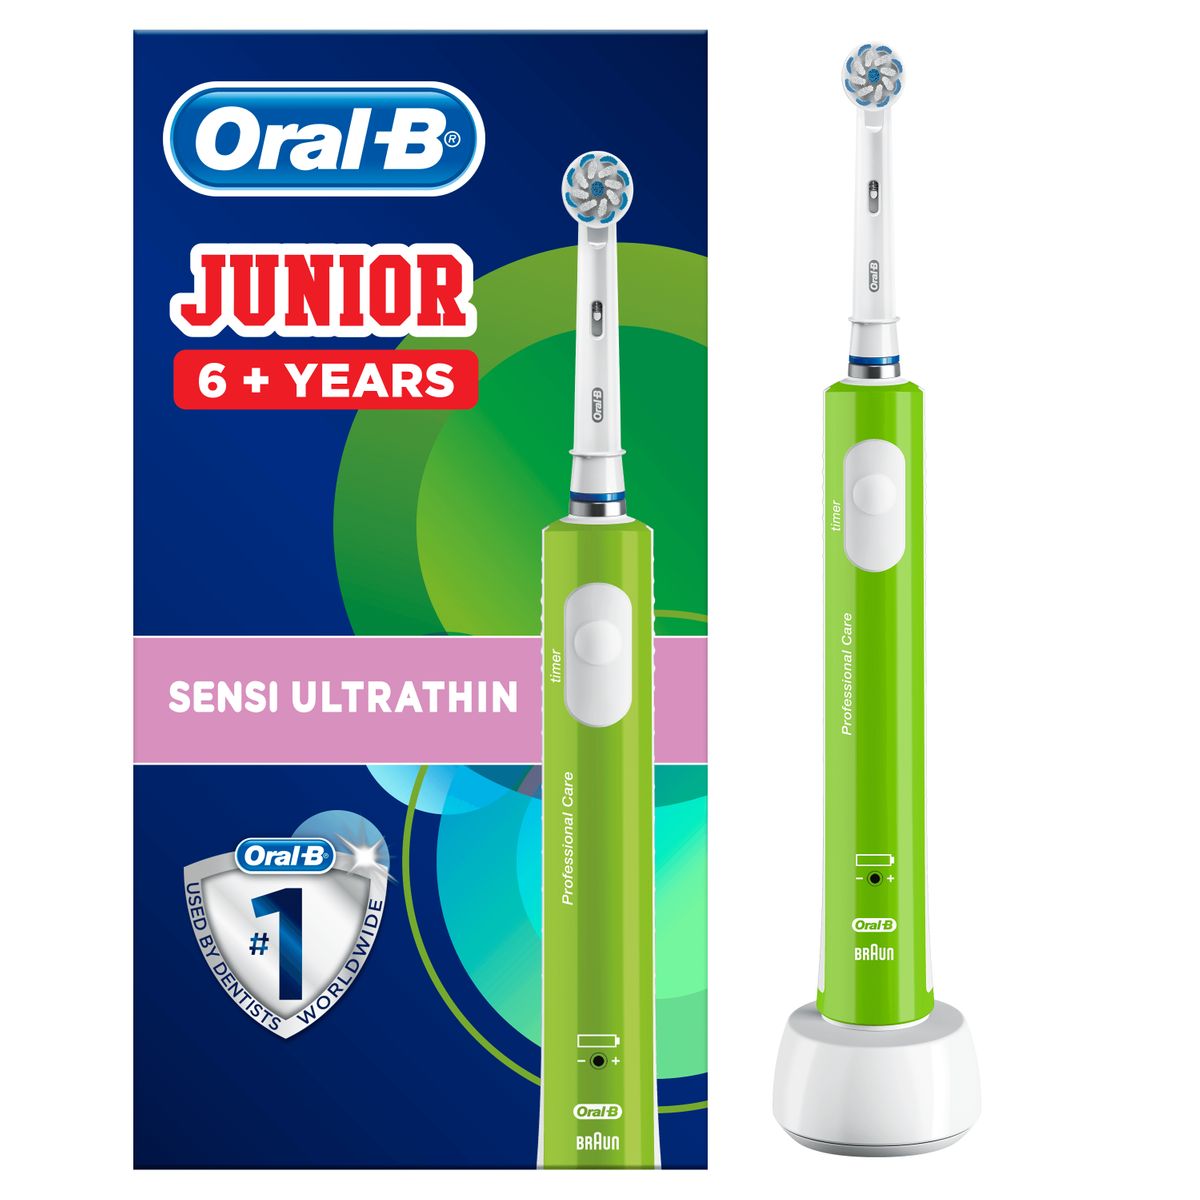 Oral-B Junior Electric Toothbrush/Electric Toothbrush for children over 6 years, soft bristles & timer, Designed by Braun, green Green